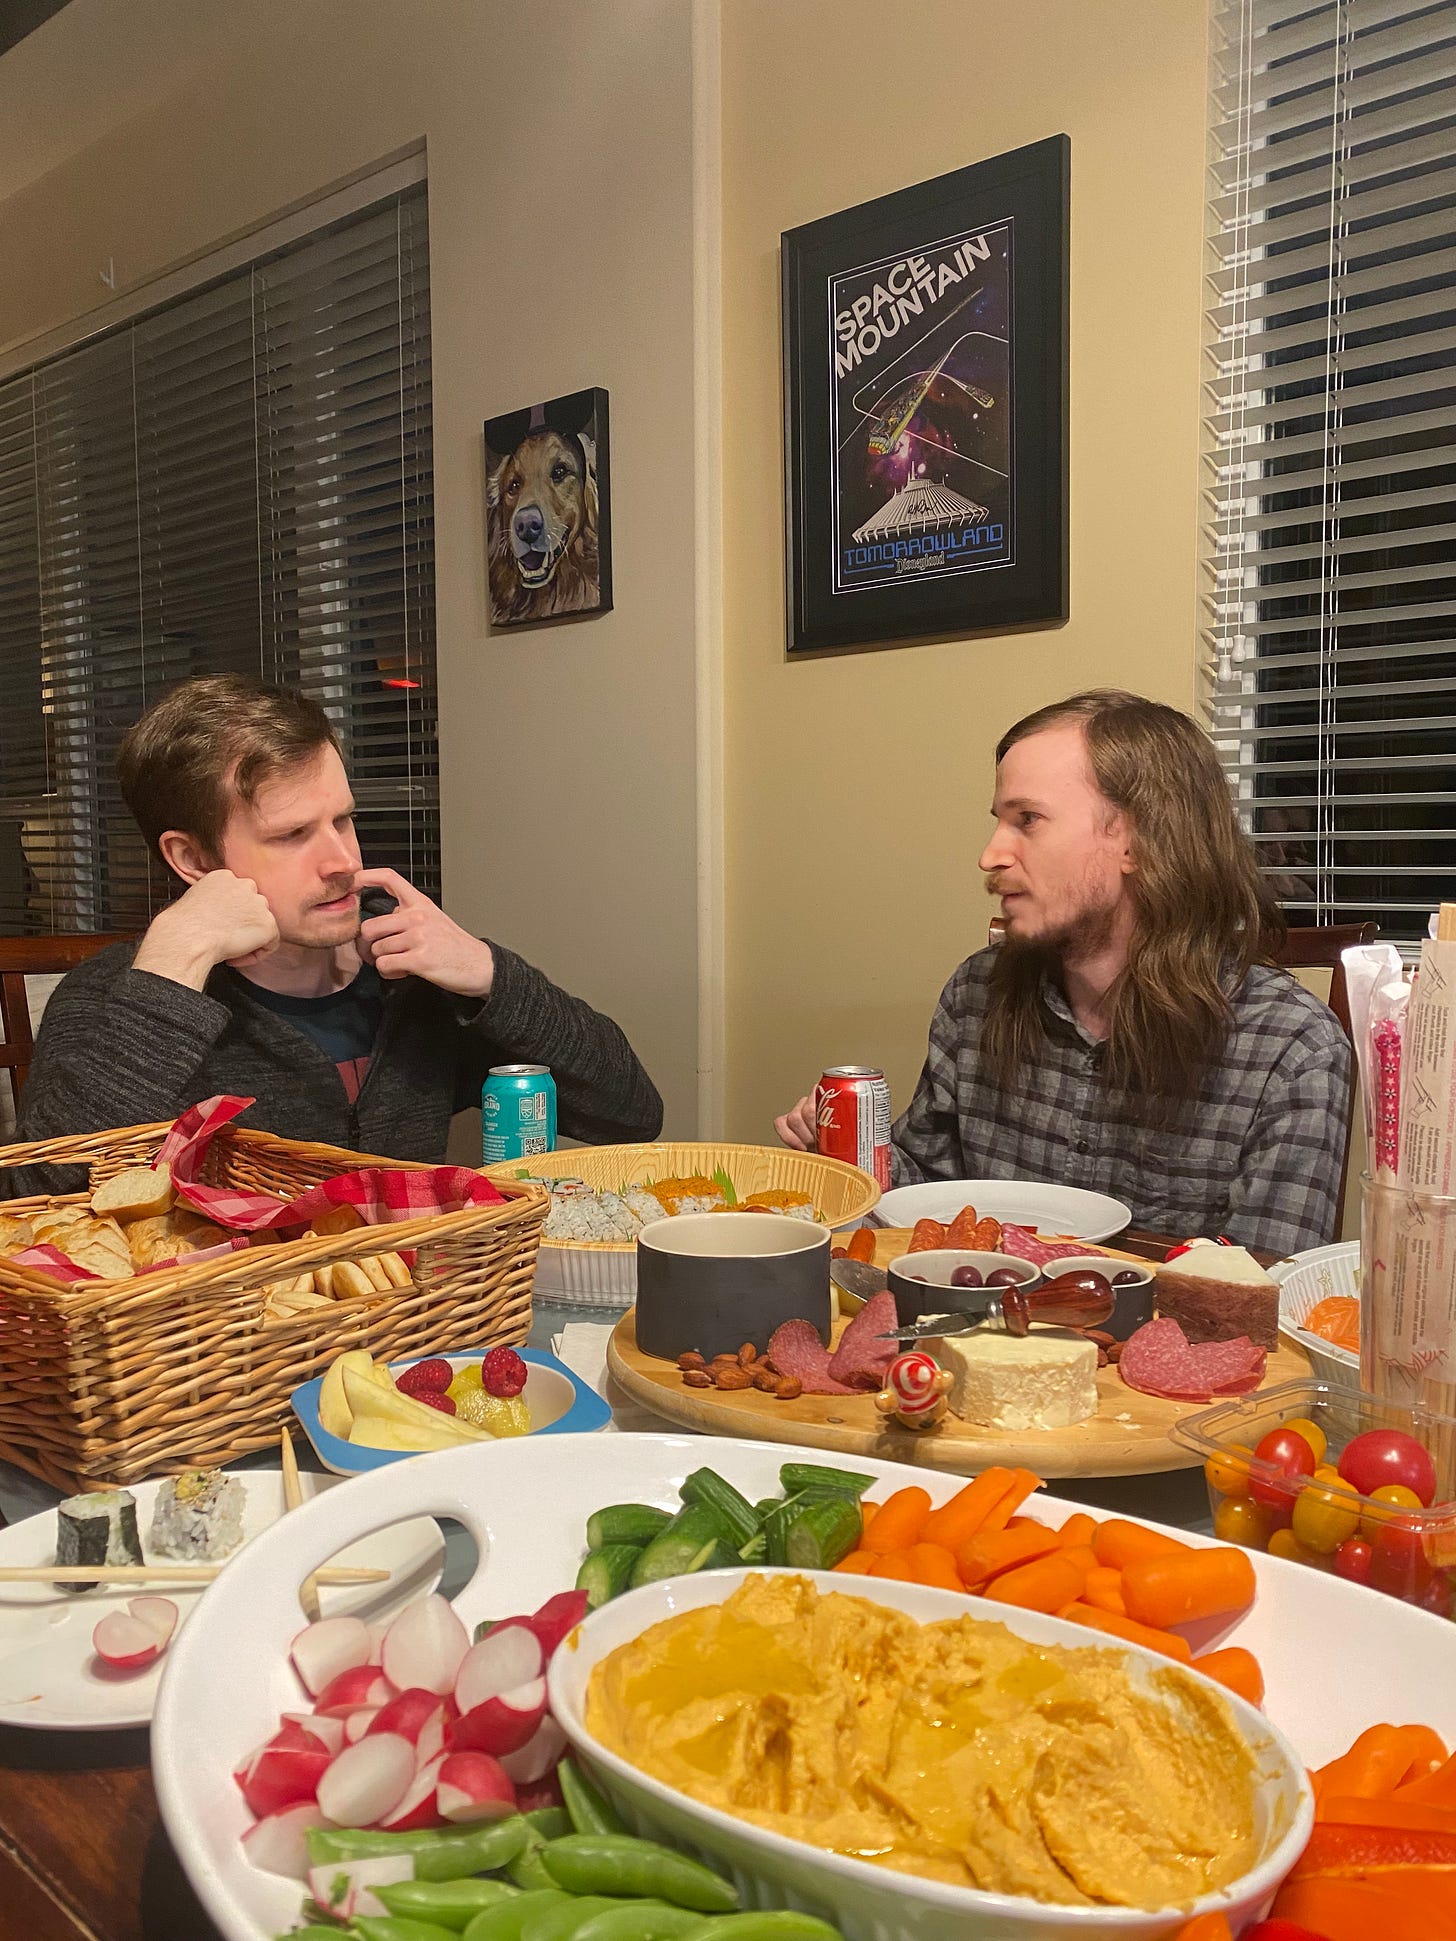 In the foreground, a plate of crudités and sweet potato hummus, surrounded by picked-at platters of charcuterie and sushi, and a basket of bread and crackers. On the far end of the table, Ken (long-hair, a short beard, and a grey checkered shirt) sits on the right talking to Trav on the left (short hair and wearing a grey sweater), who has a look of concentration on his face, his face resting on his hand.